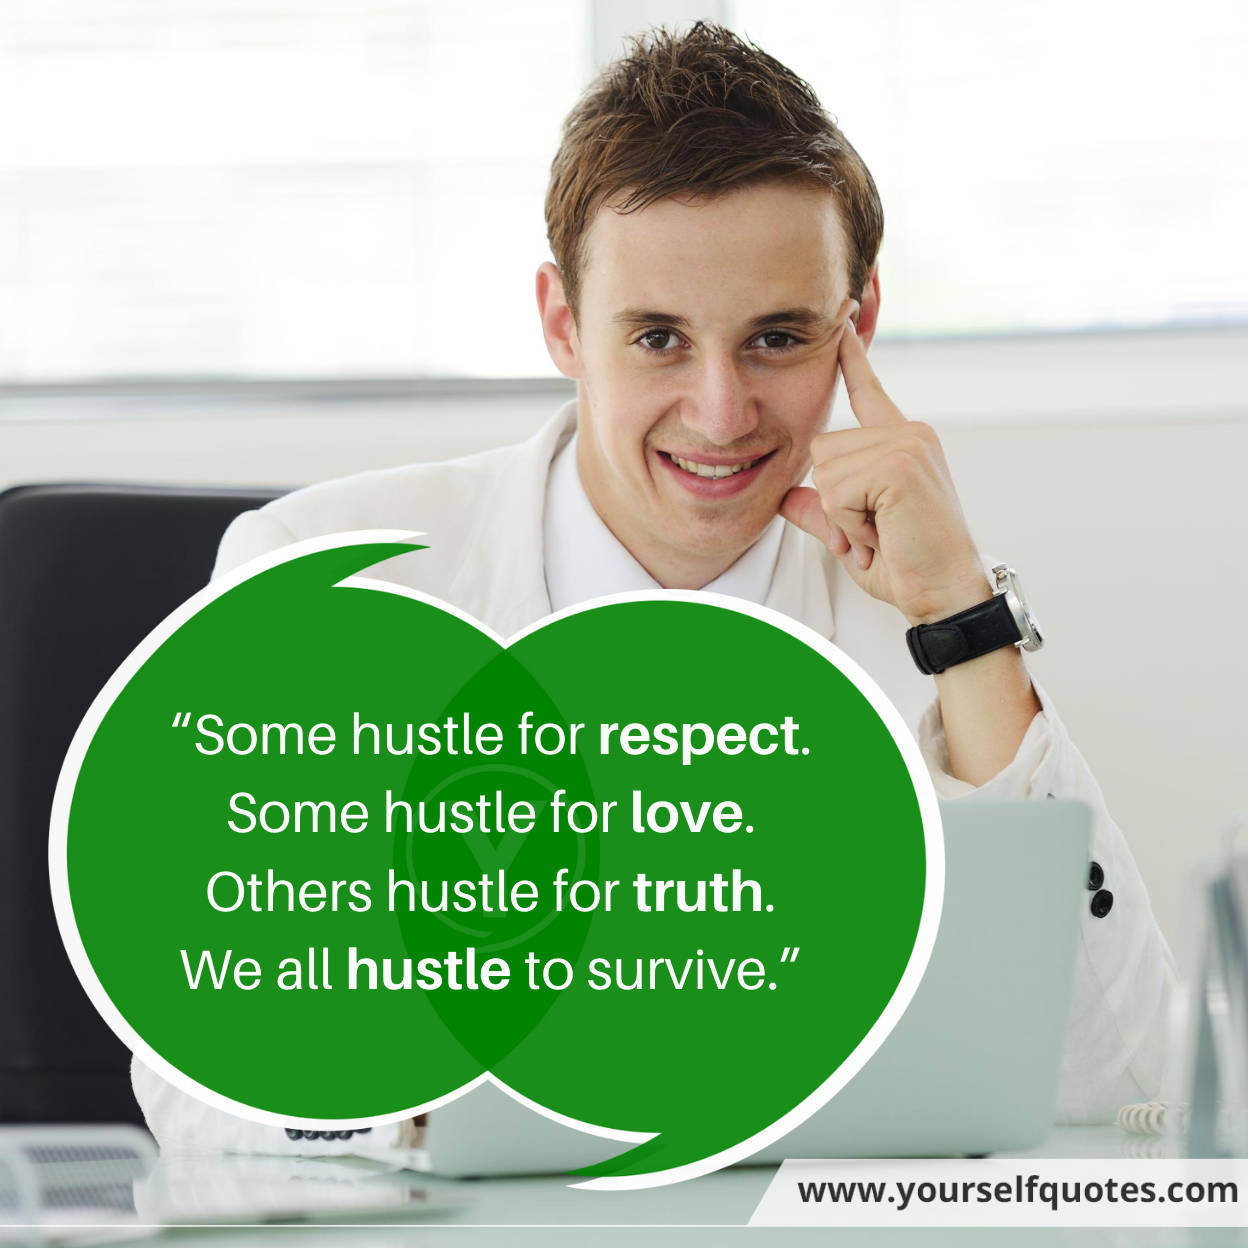 Hustle Quotes Sayings